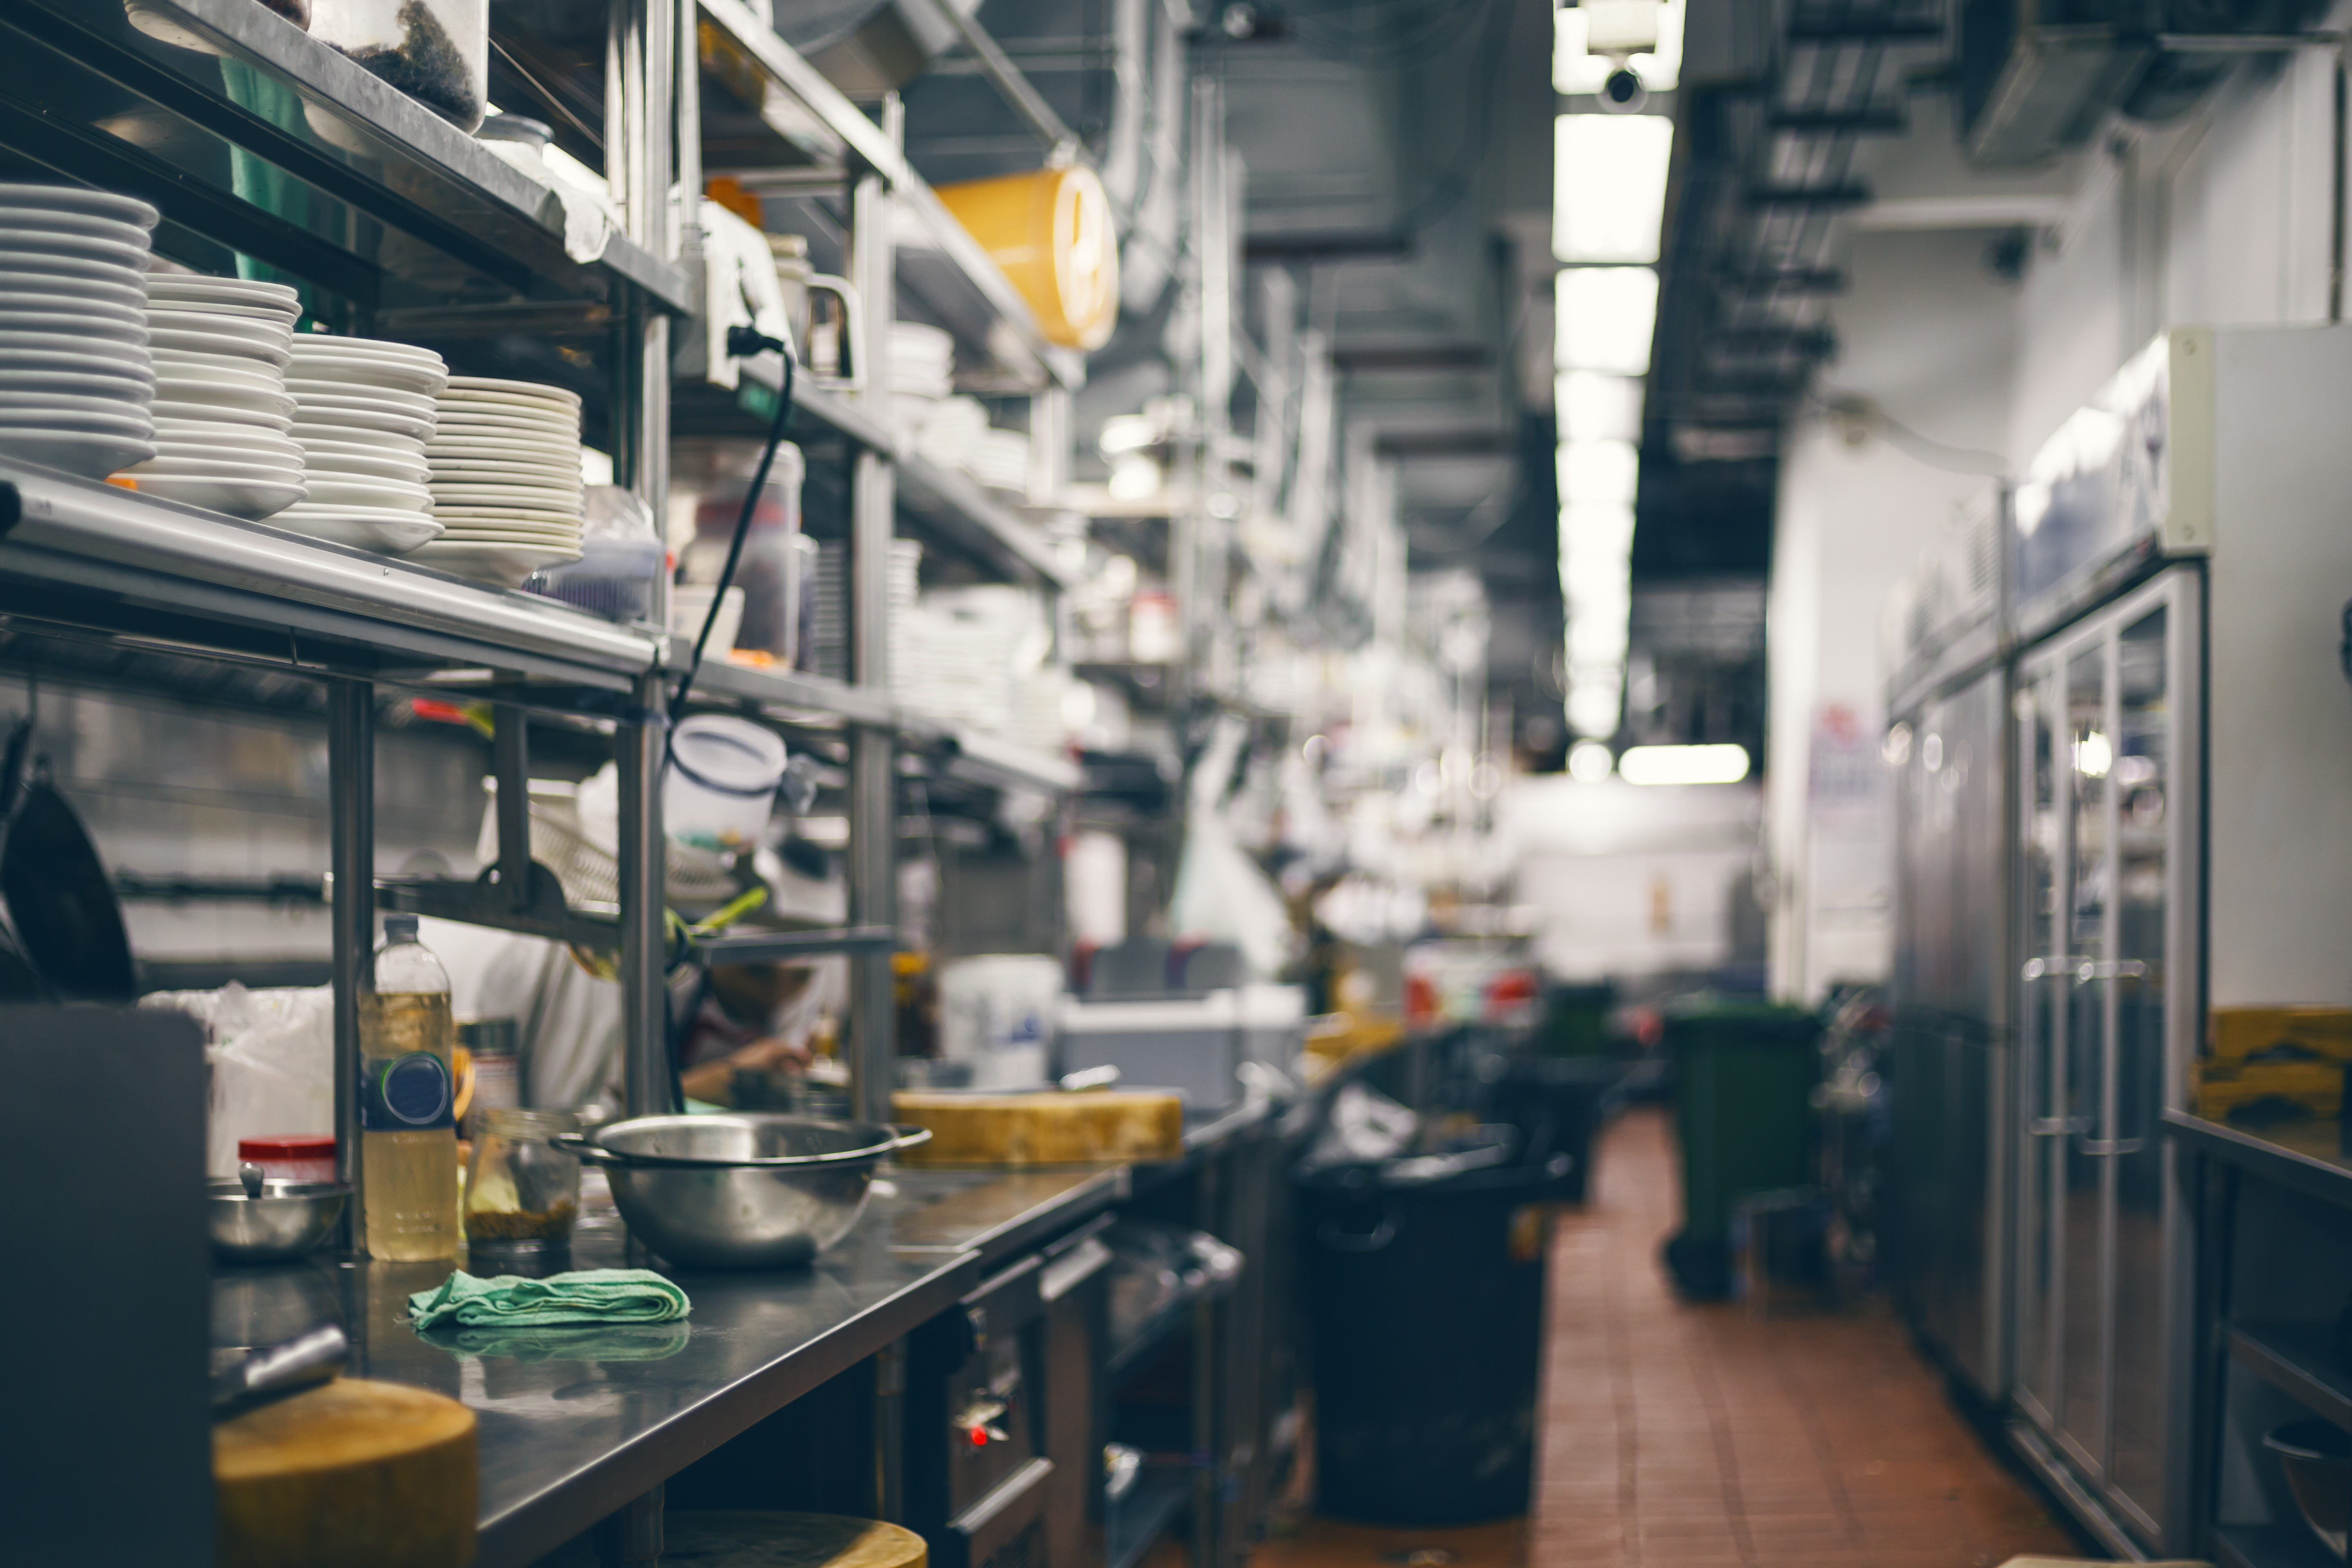 The Restaurant Labor Crunch: What the Food Service Market Research Says